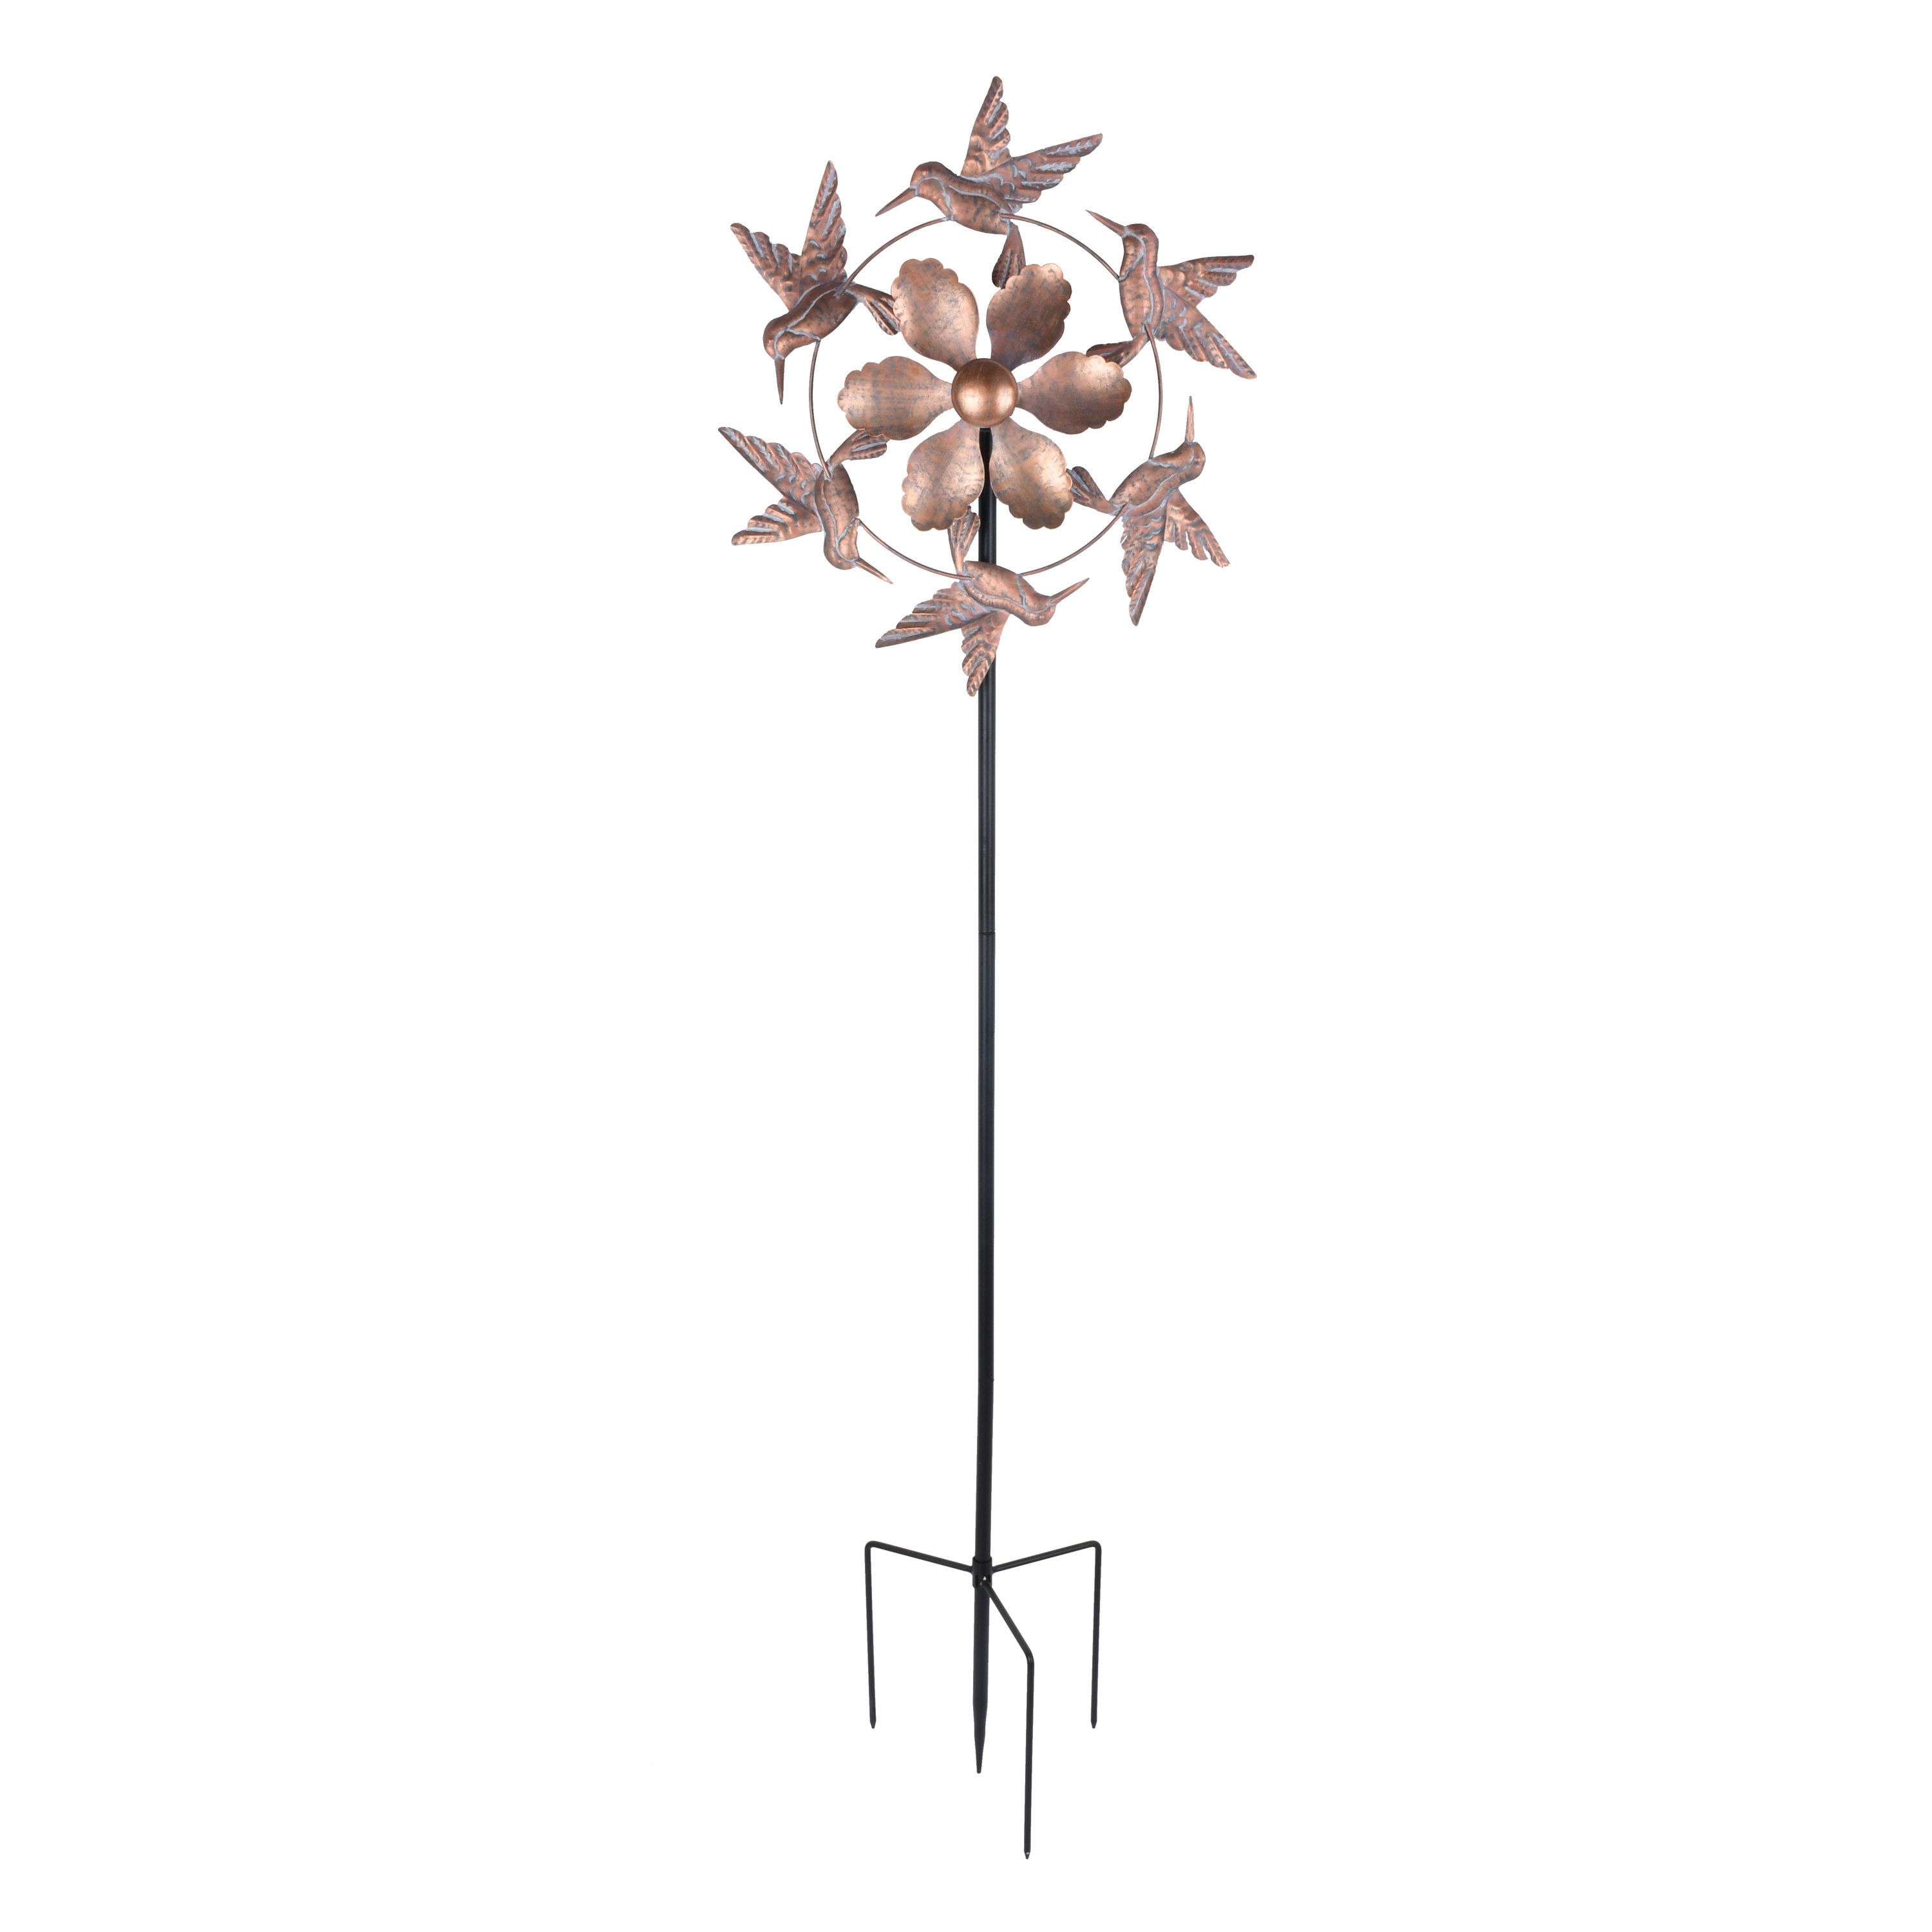 Mainstays 53" Copper Metal Wind Spinner - image 2 of 9